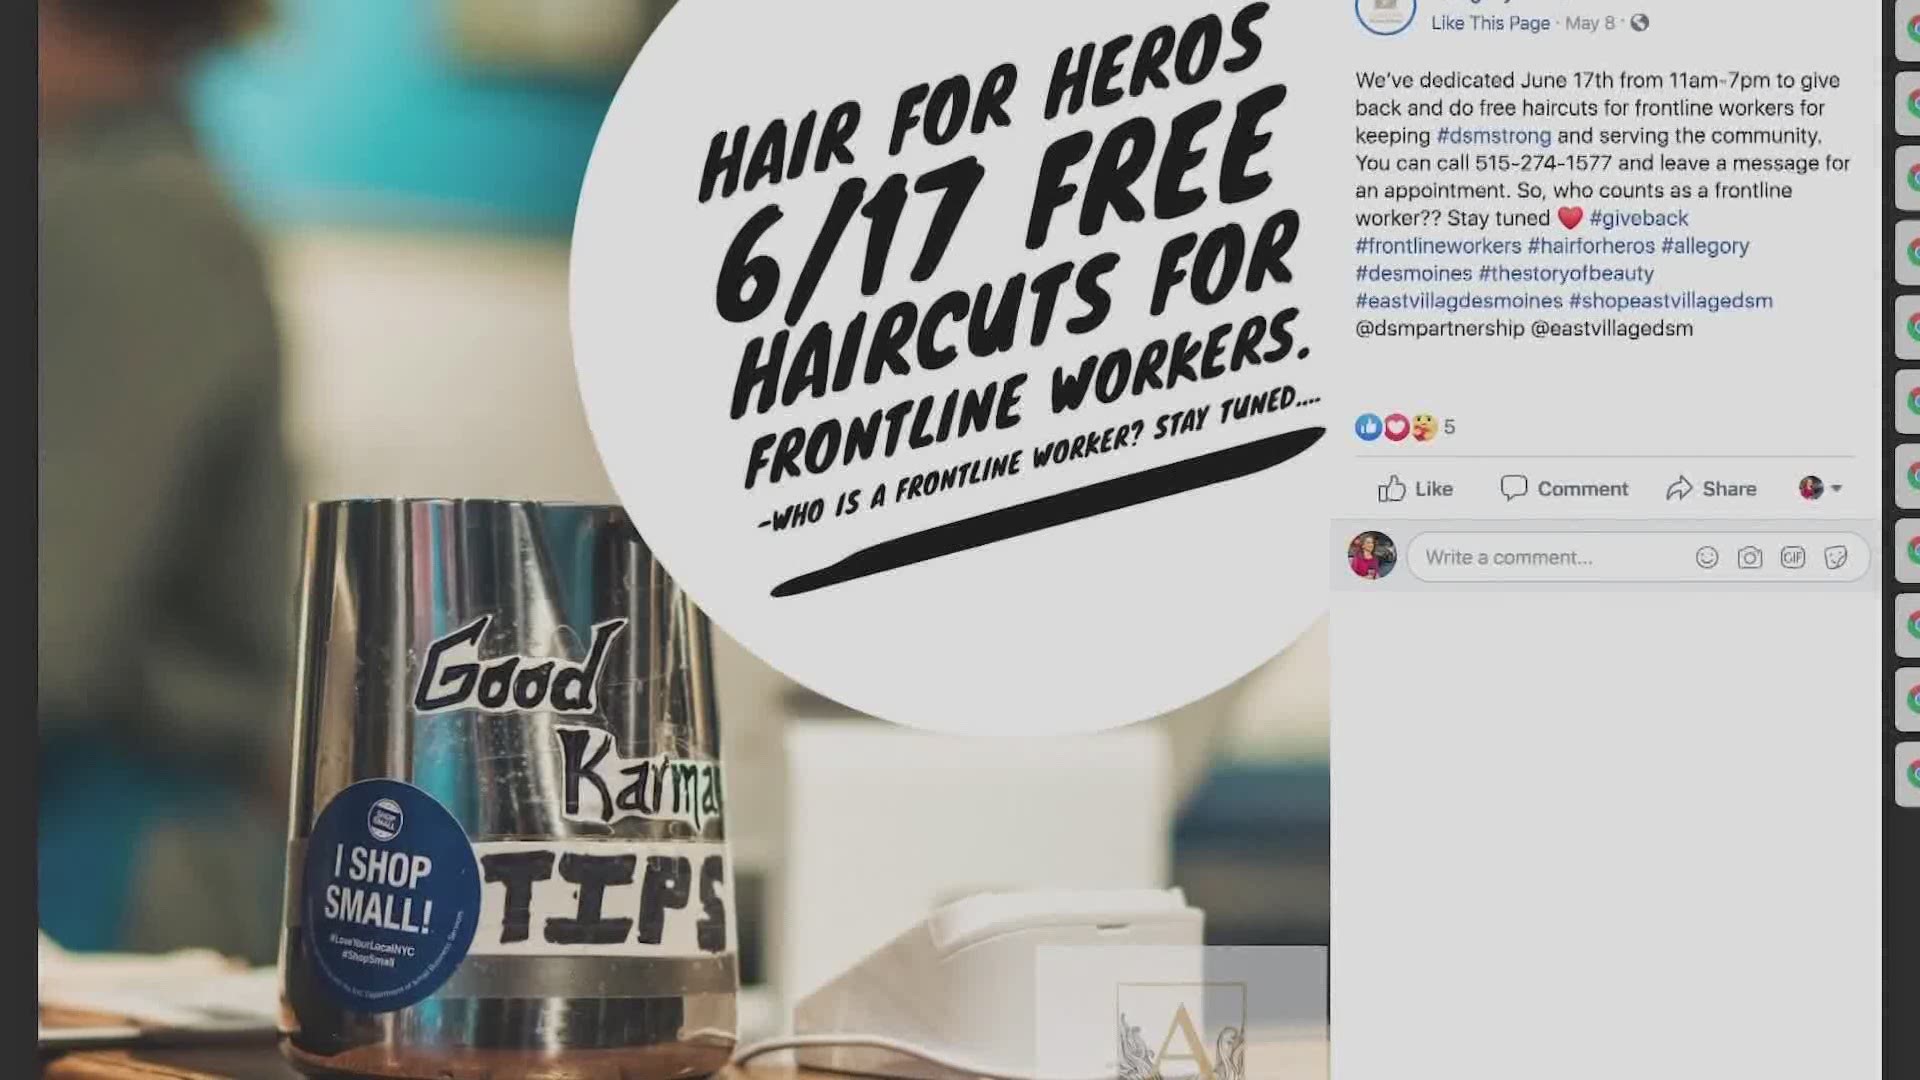 The owners of Allegory Salon in the East Village want to give back to the workers on the front lines by providing free haircuts on a day in June.